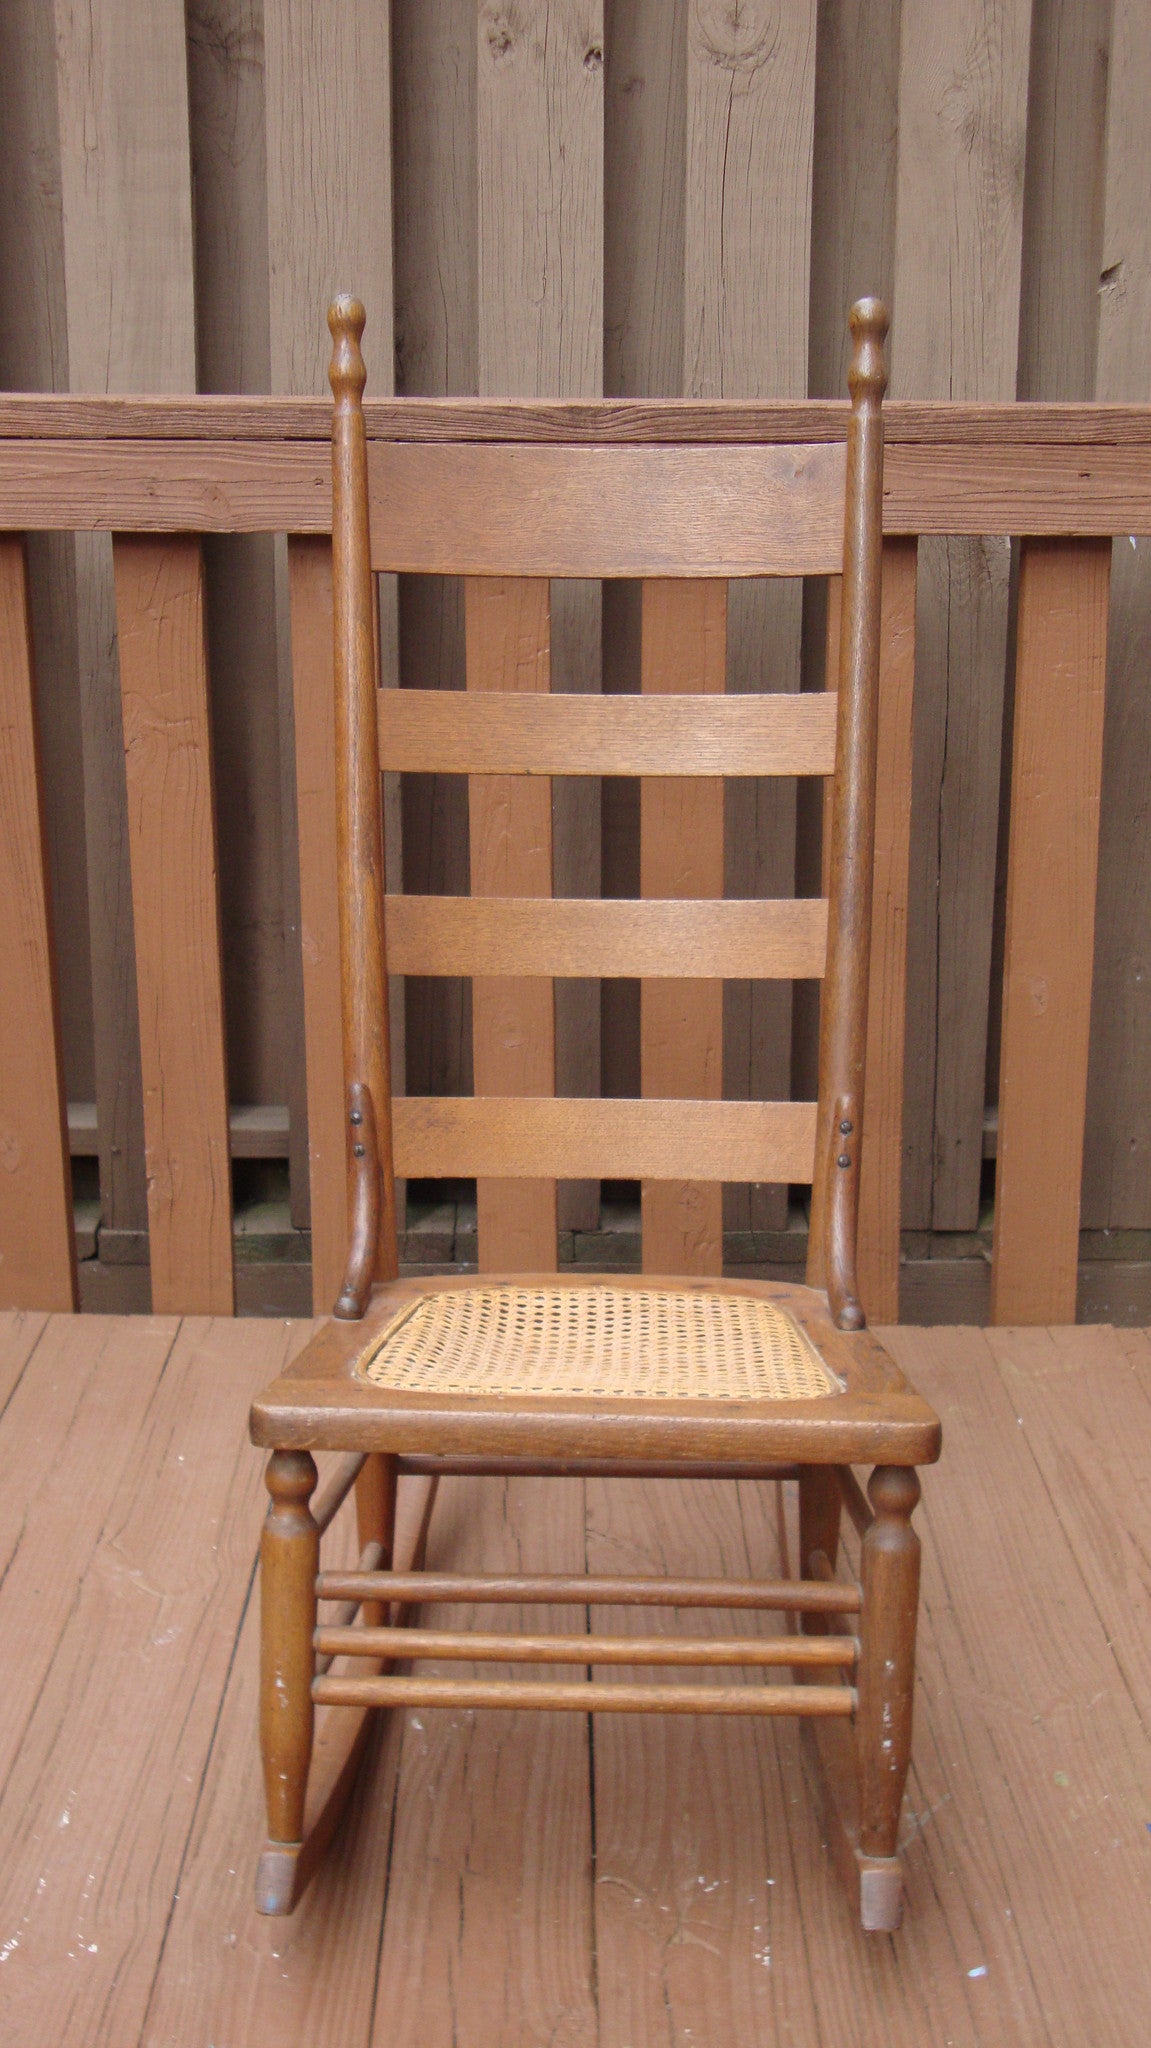 [SOLD] Antique Early American Ladderback Rocker Chair